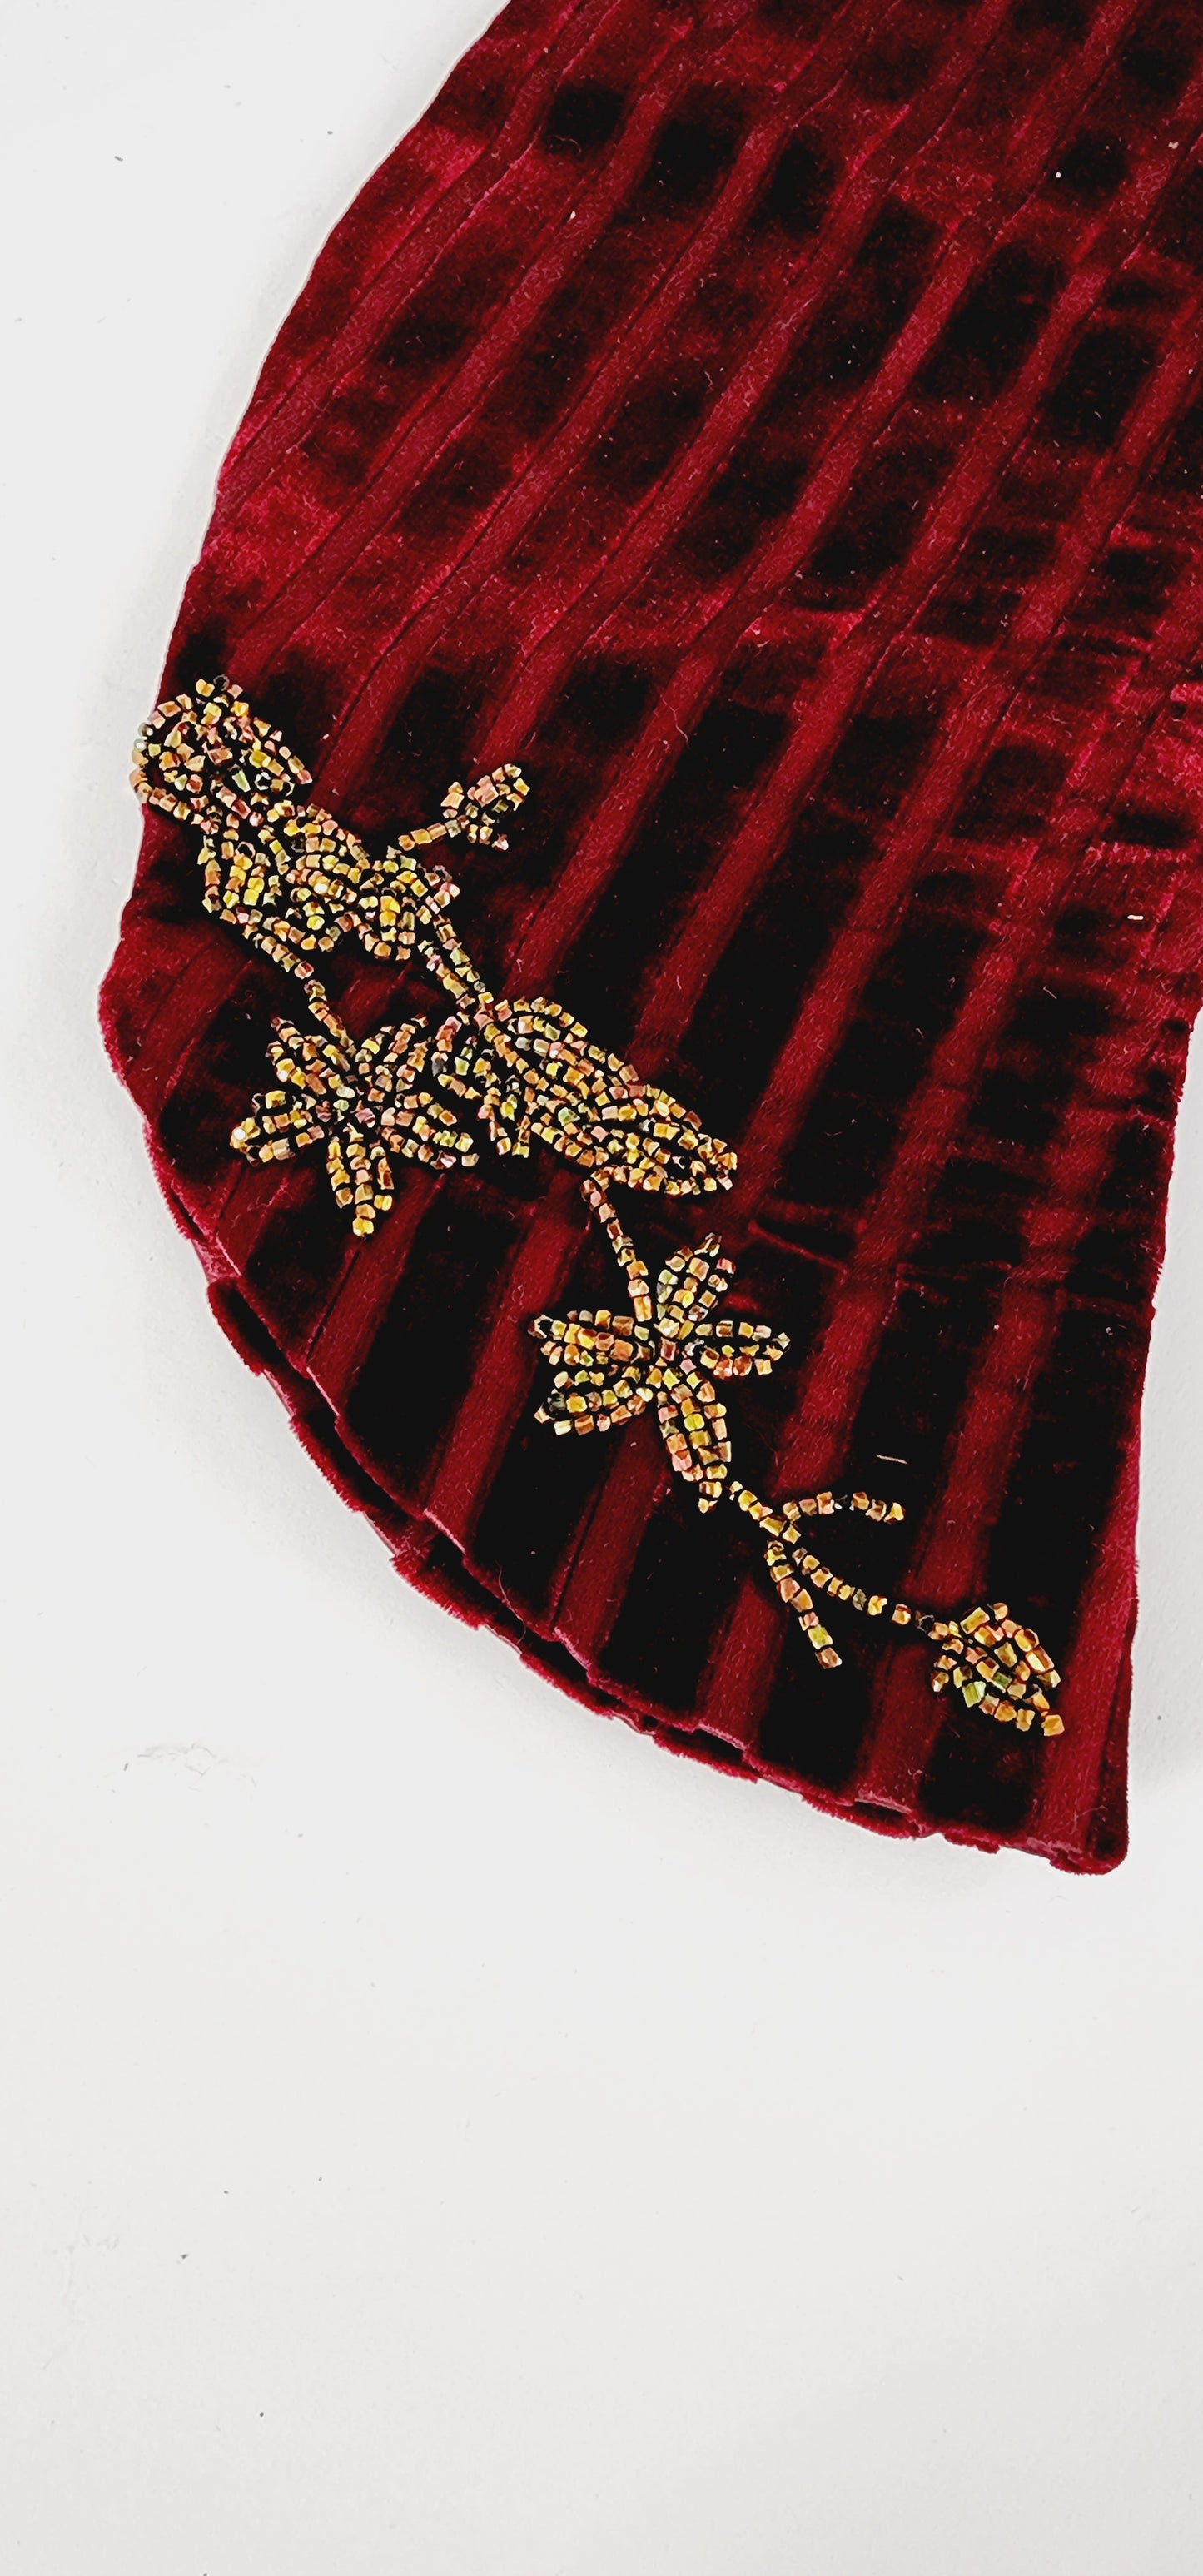 Edwardian Costume Sleeve in Red Velvet Gold Bead Embroidery